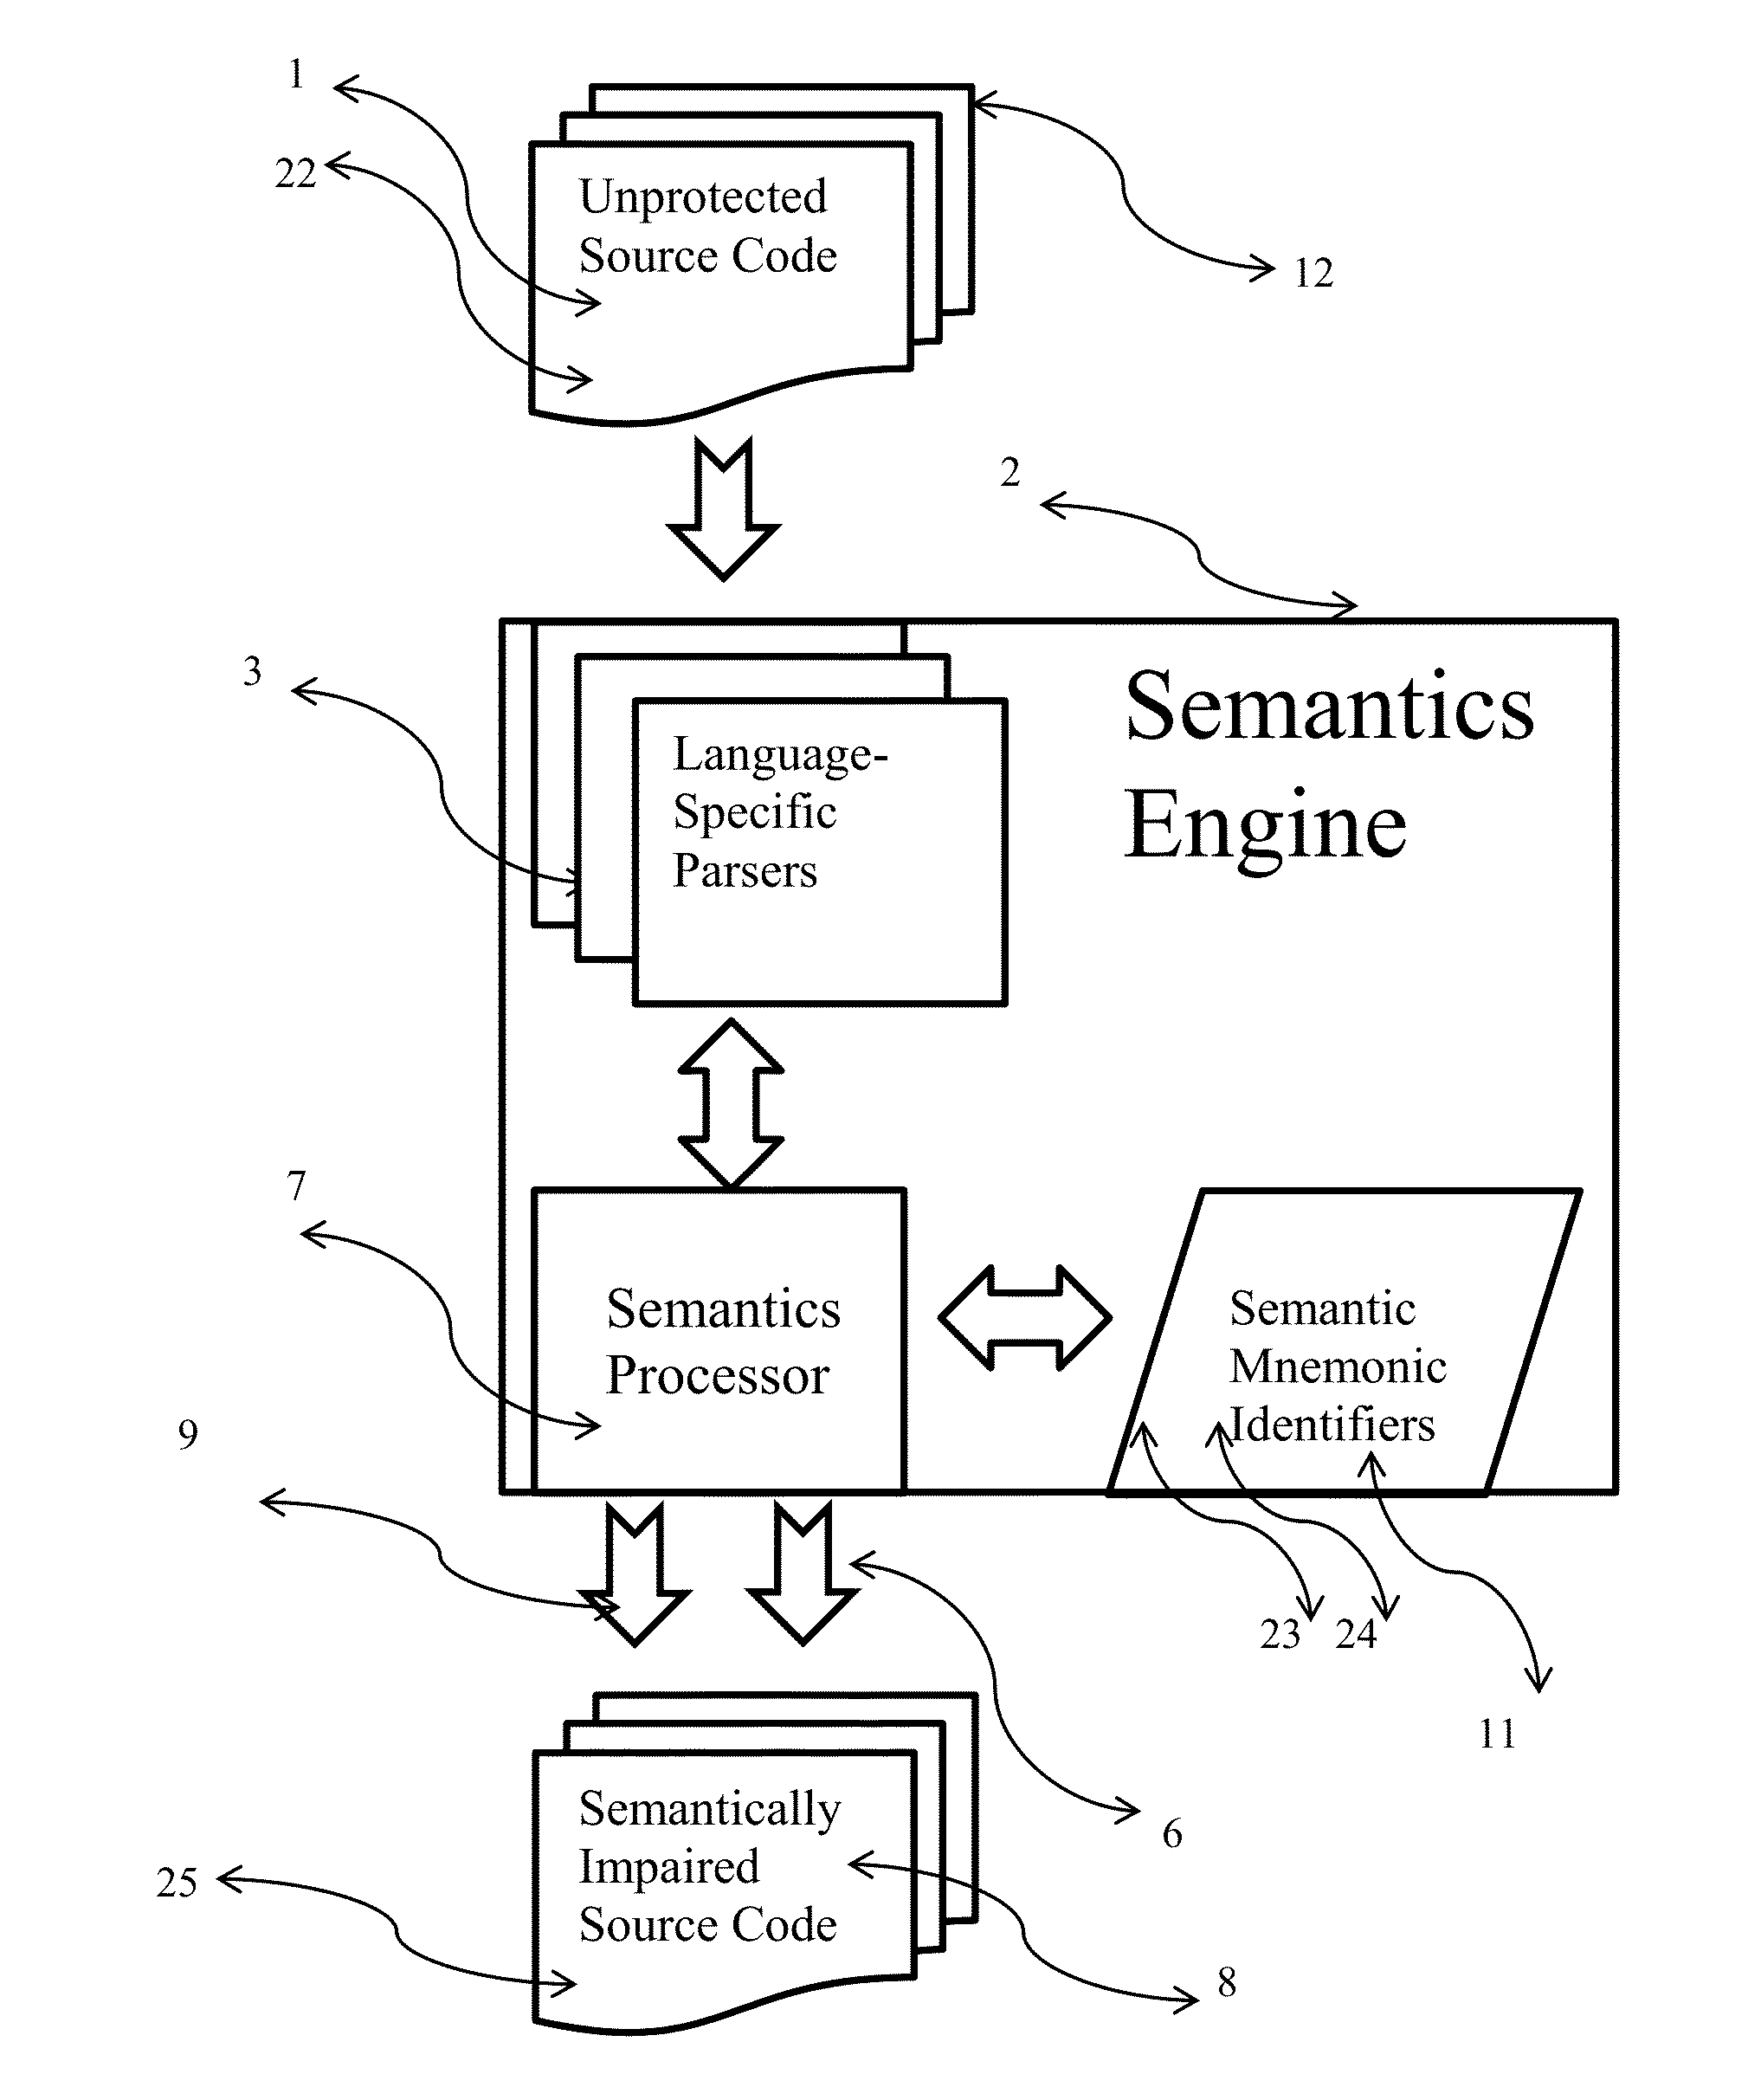 Method for determining and protecting proprietary source code using mnemonic identifiers